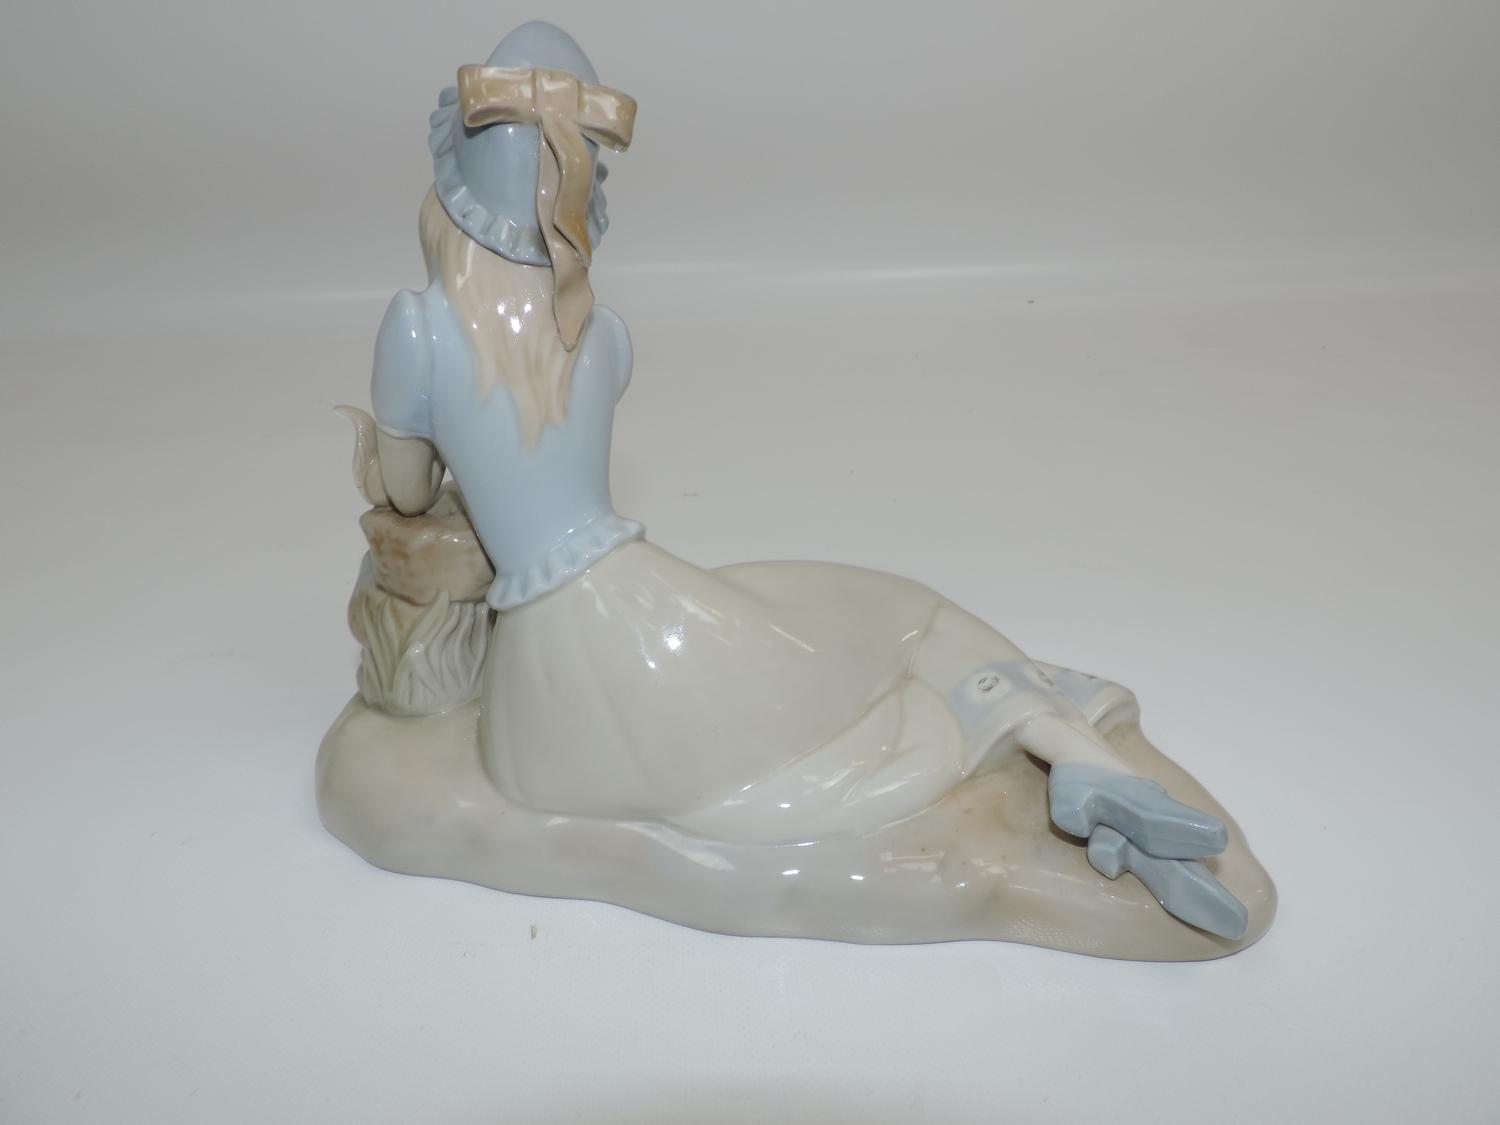 2x Spanish Porcelain Figures - One Miguel and Other Is Lladro (Hands Missing on Lladro) - Image 3 of 8